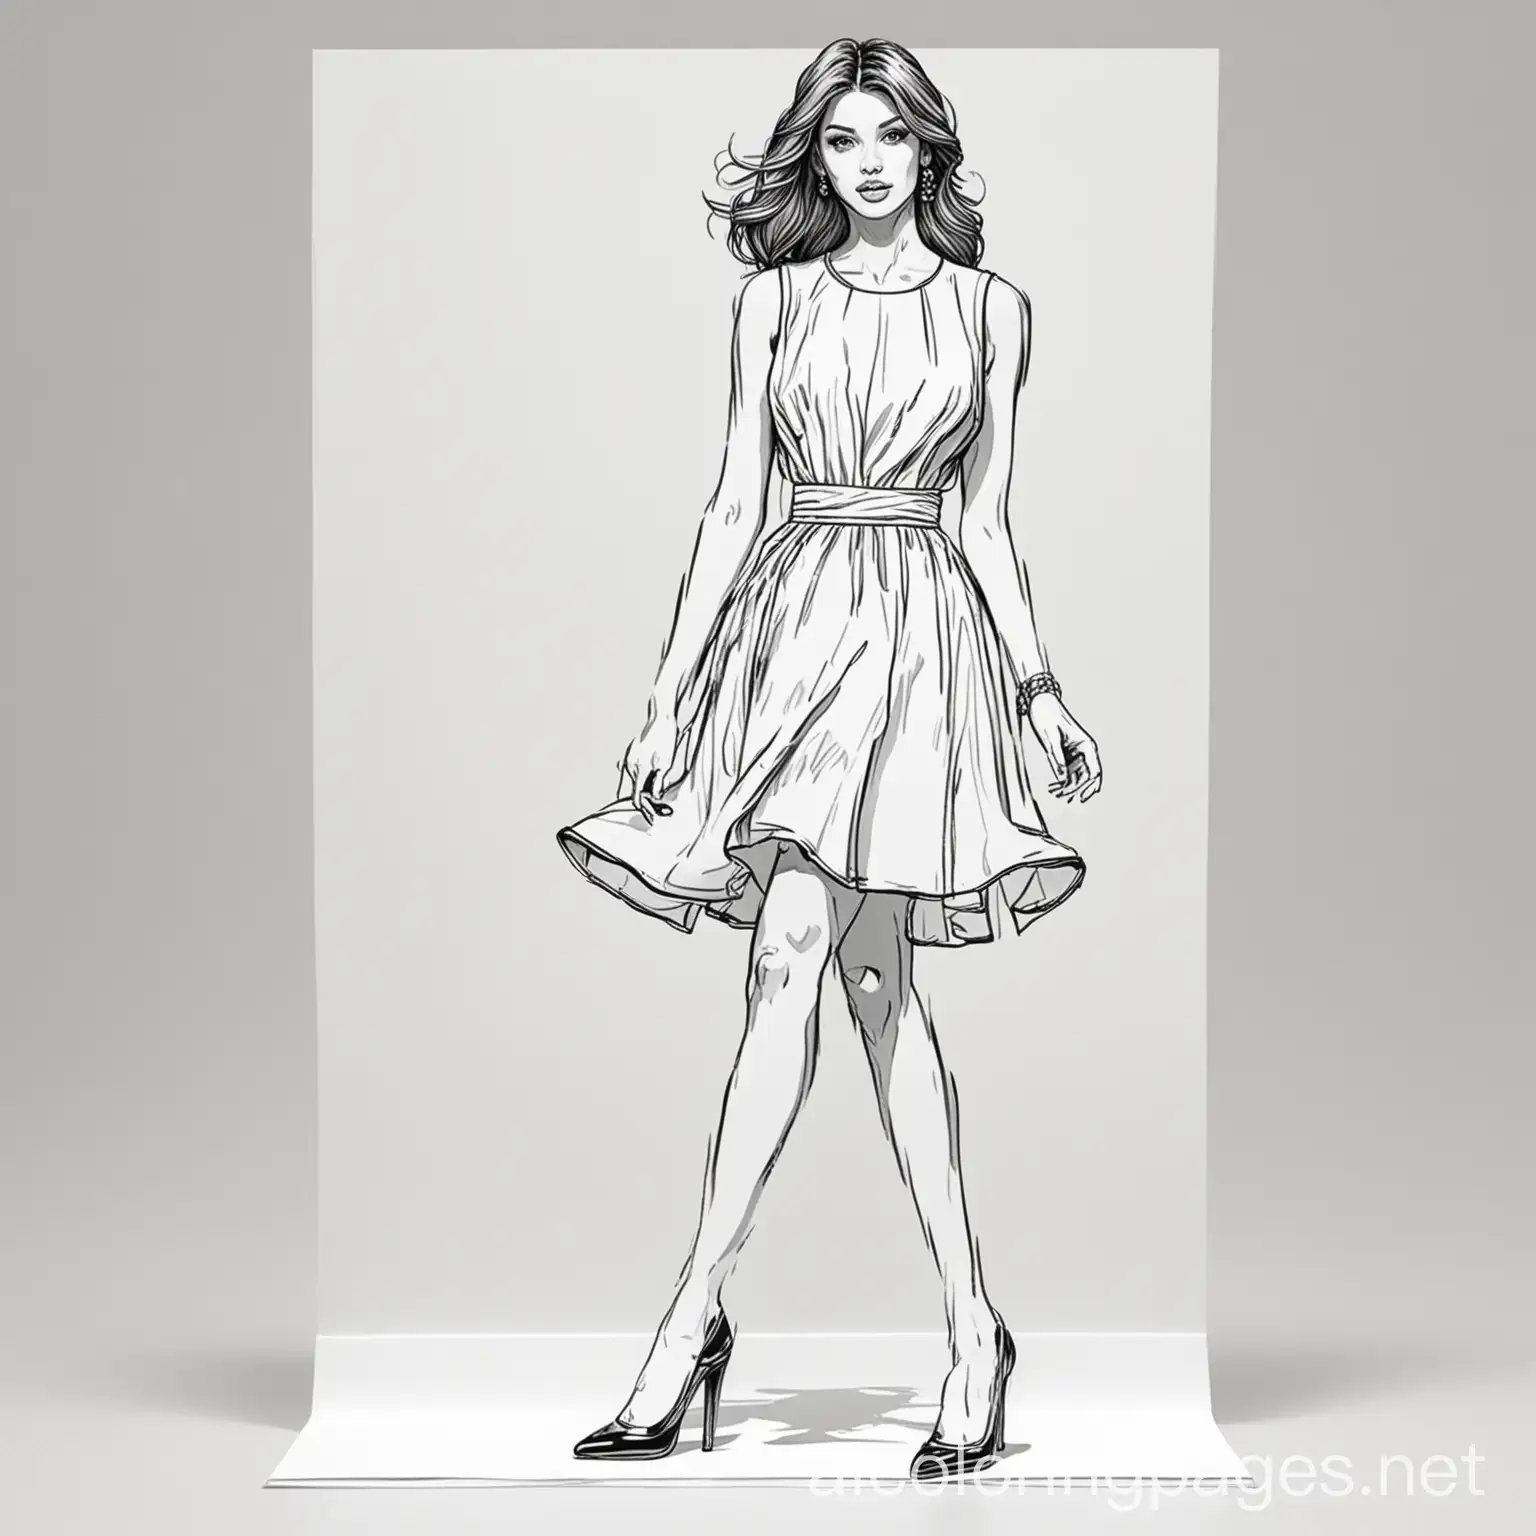 Fashion illustration of model women, fashion dresses, high heels, runway, Coloring Page, black and white, line art, white background, Simplicity, Ample White Space. The background of the coloring page is plain white to make it easy for young children to color within the lines. The outlines of all the subjects are easy to distinguish, making it simple for kids to color without too much difficulty